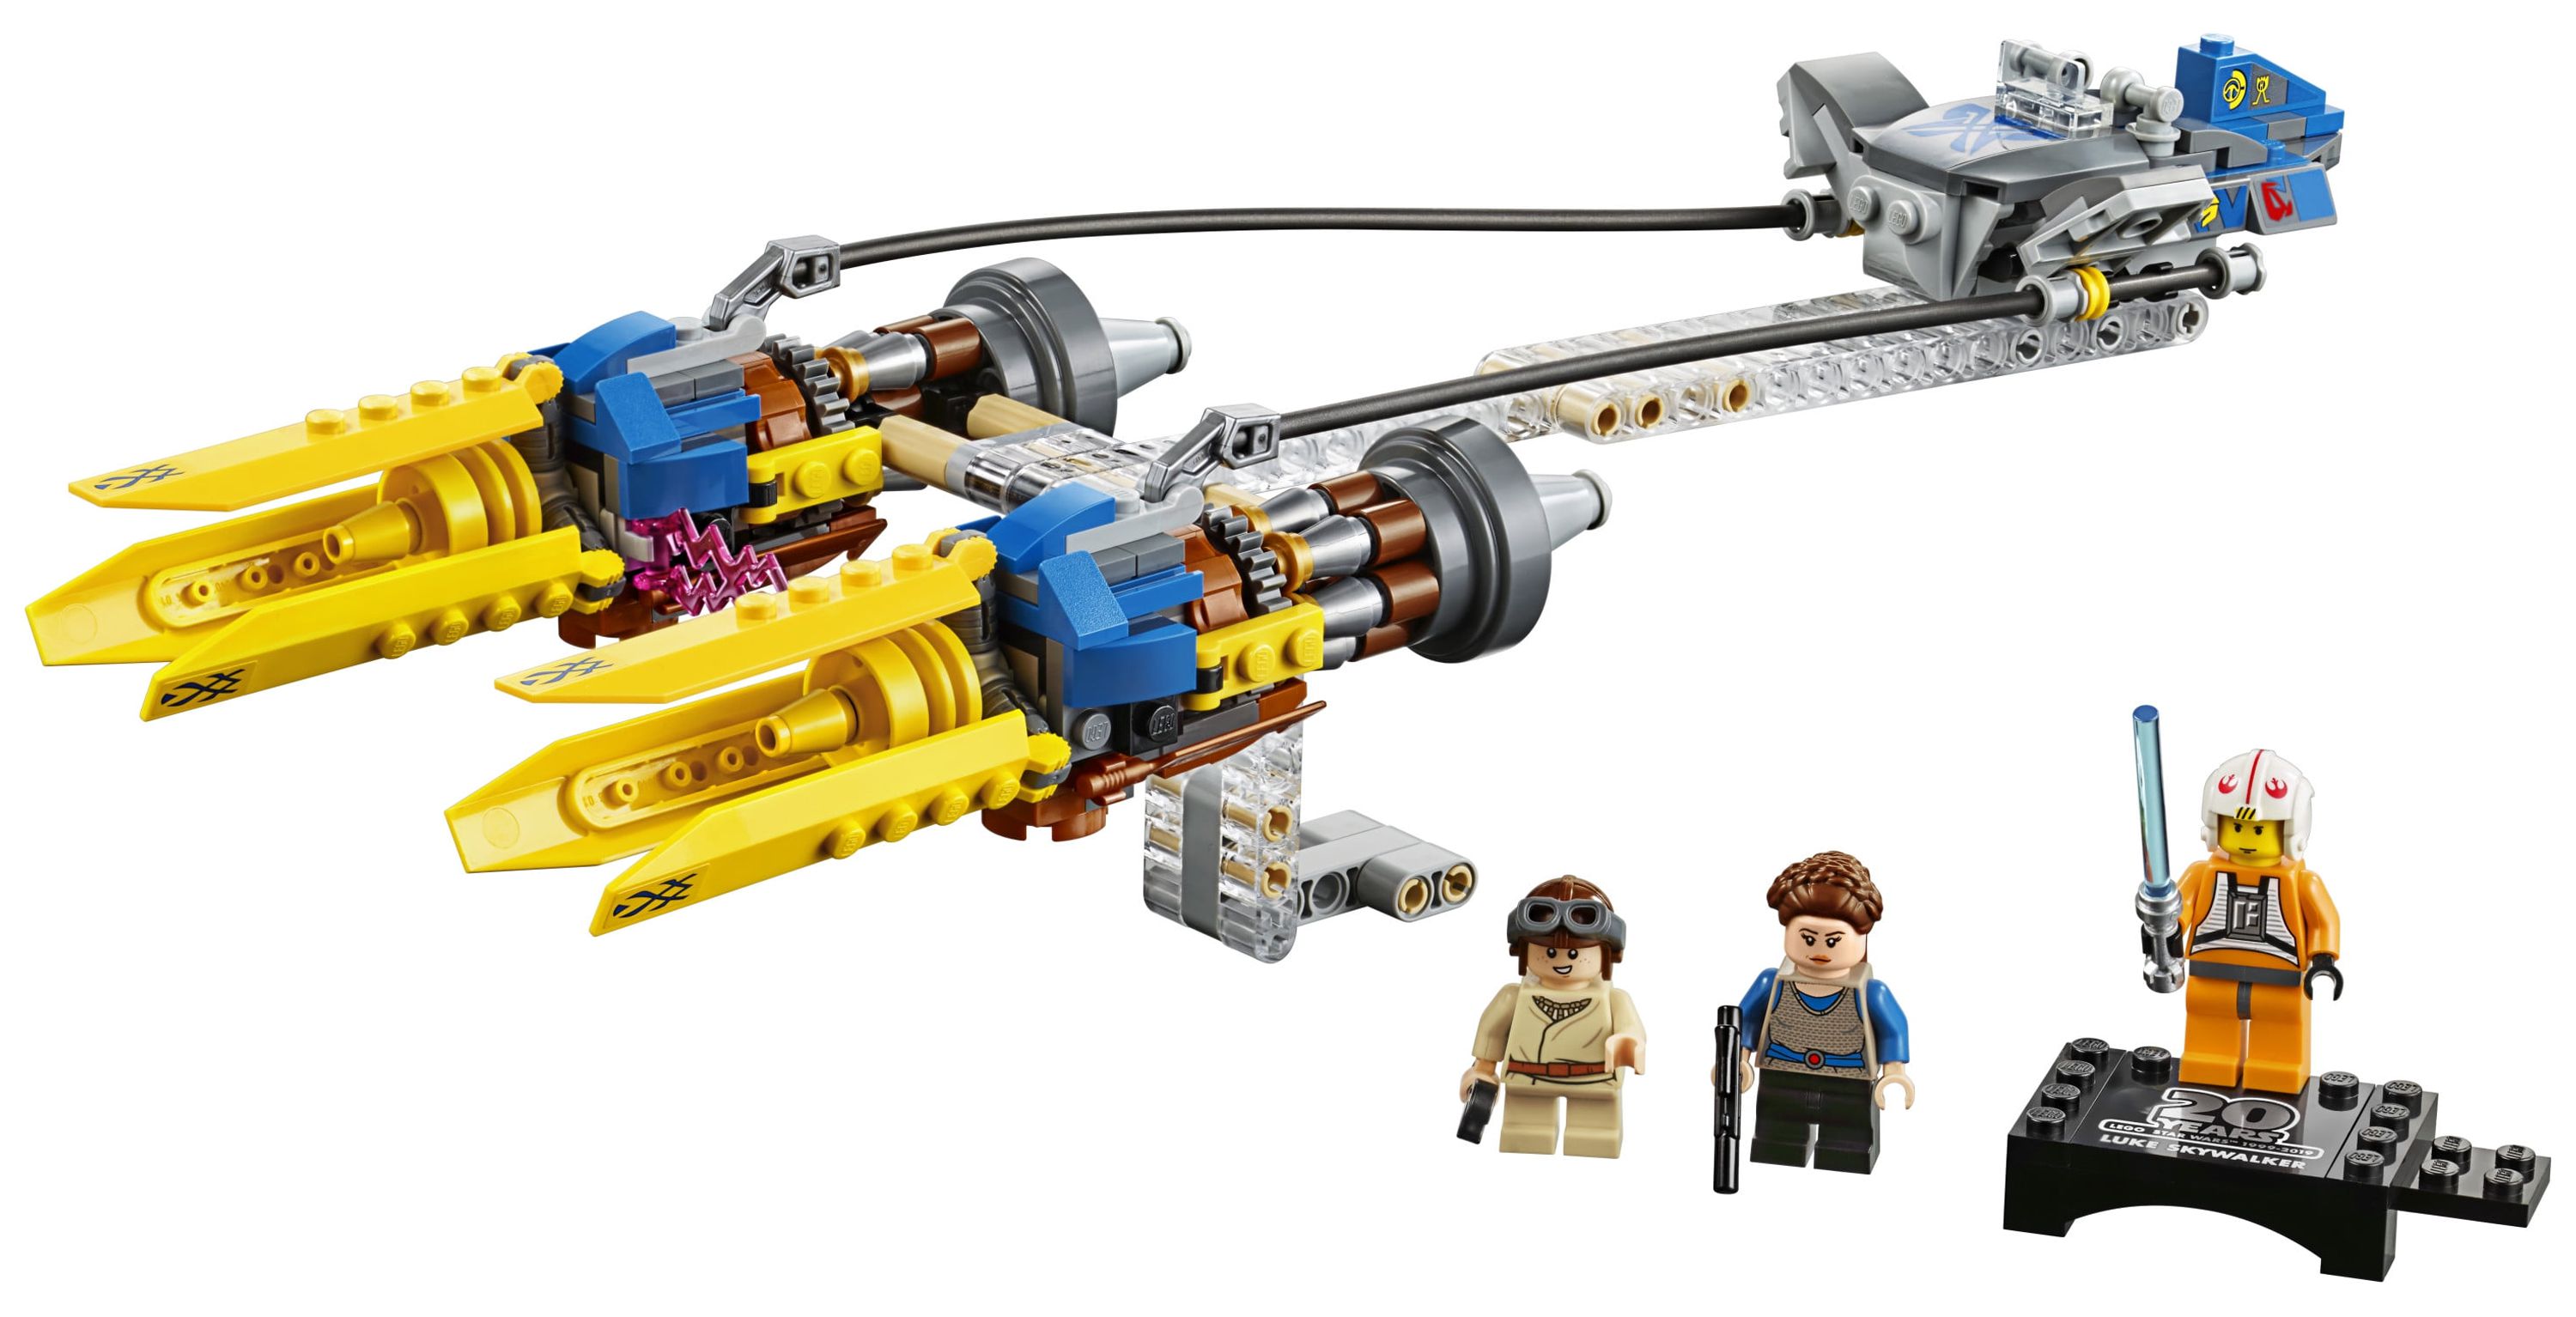 LEGO Star Wars 20th Anniversary Edition Anakin's Podracer Vehicle Building Set 75258 - image 3 of 6